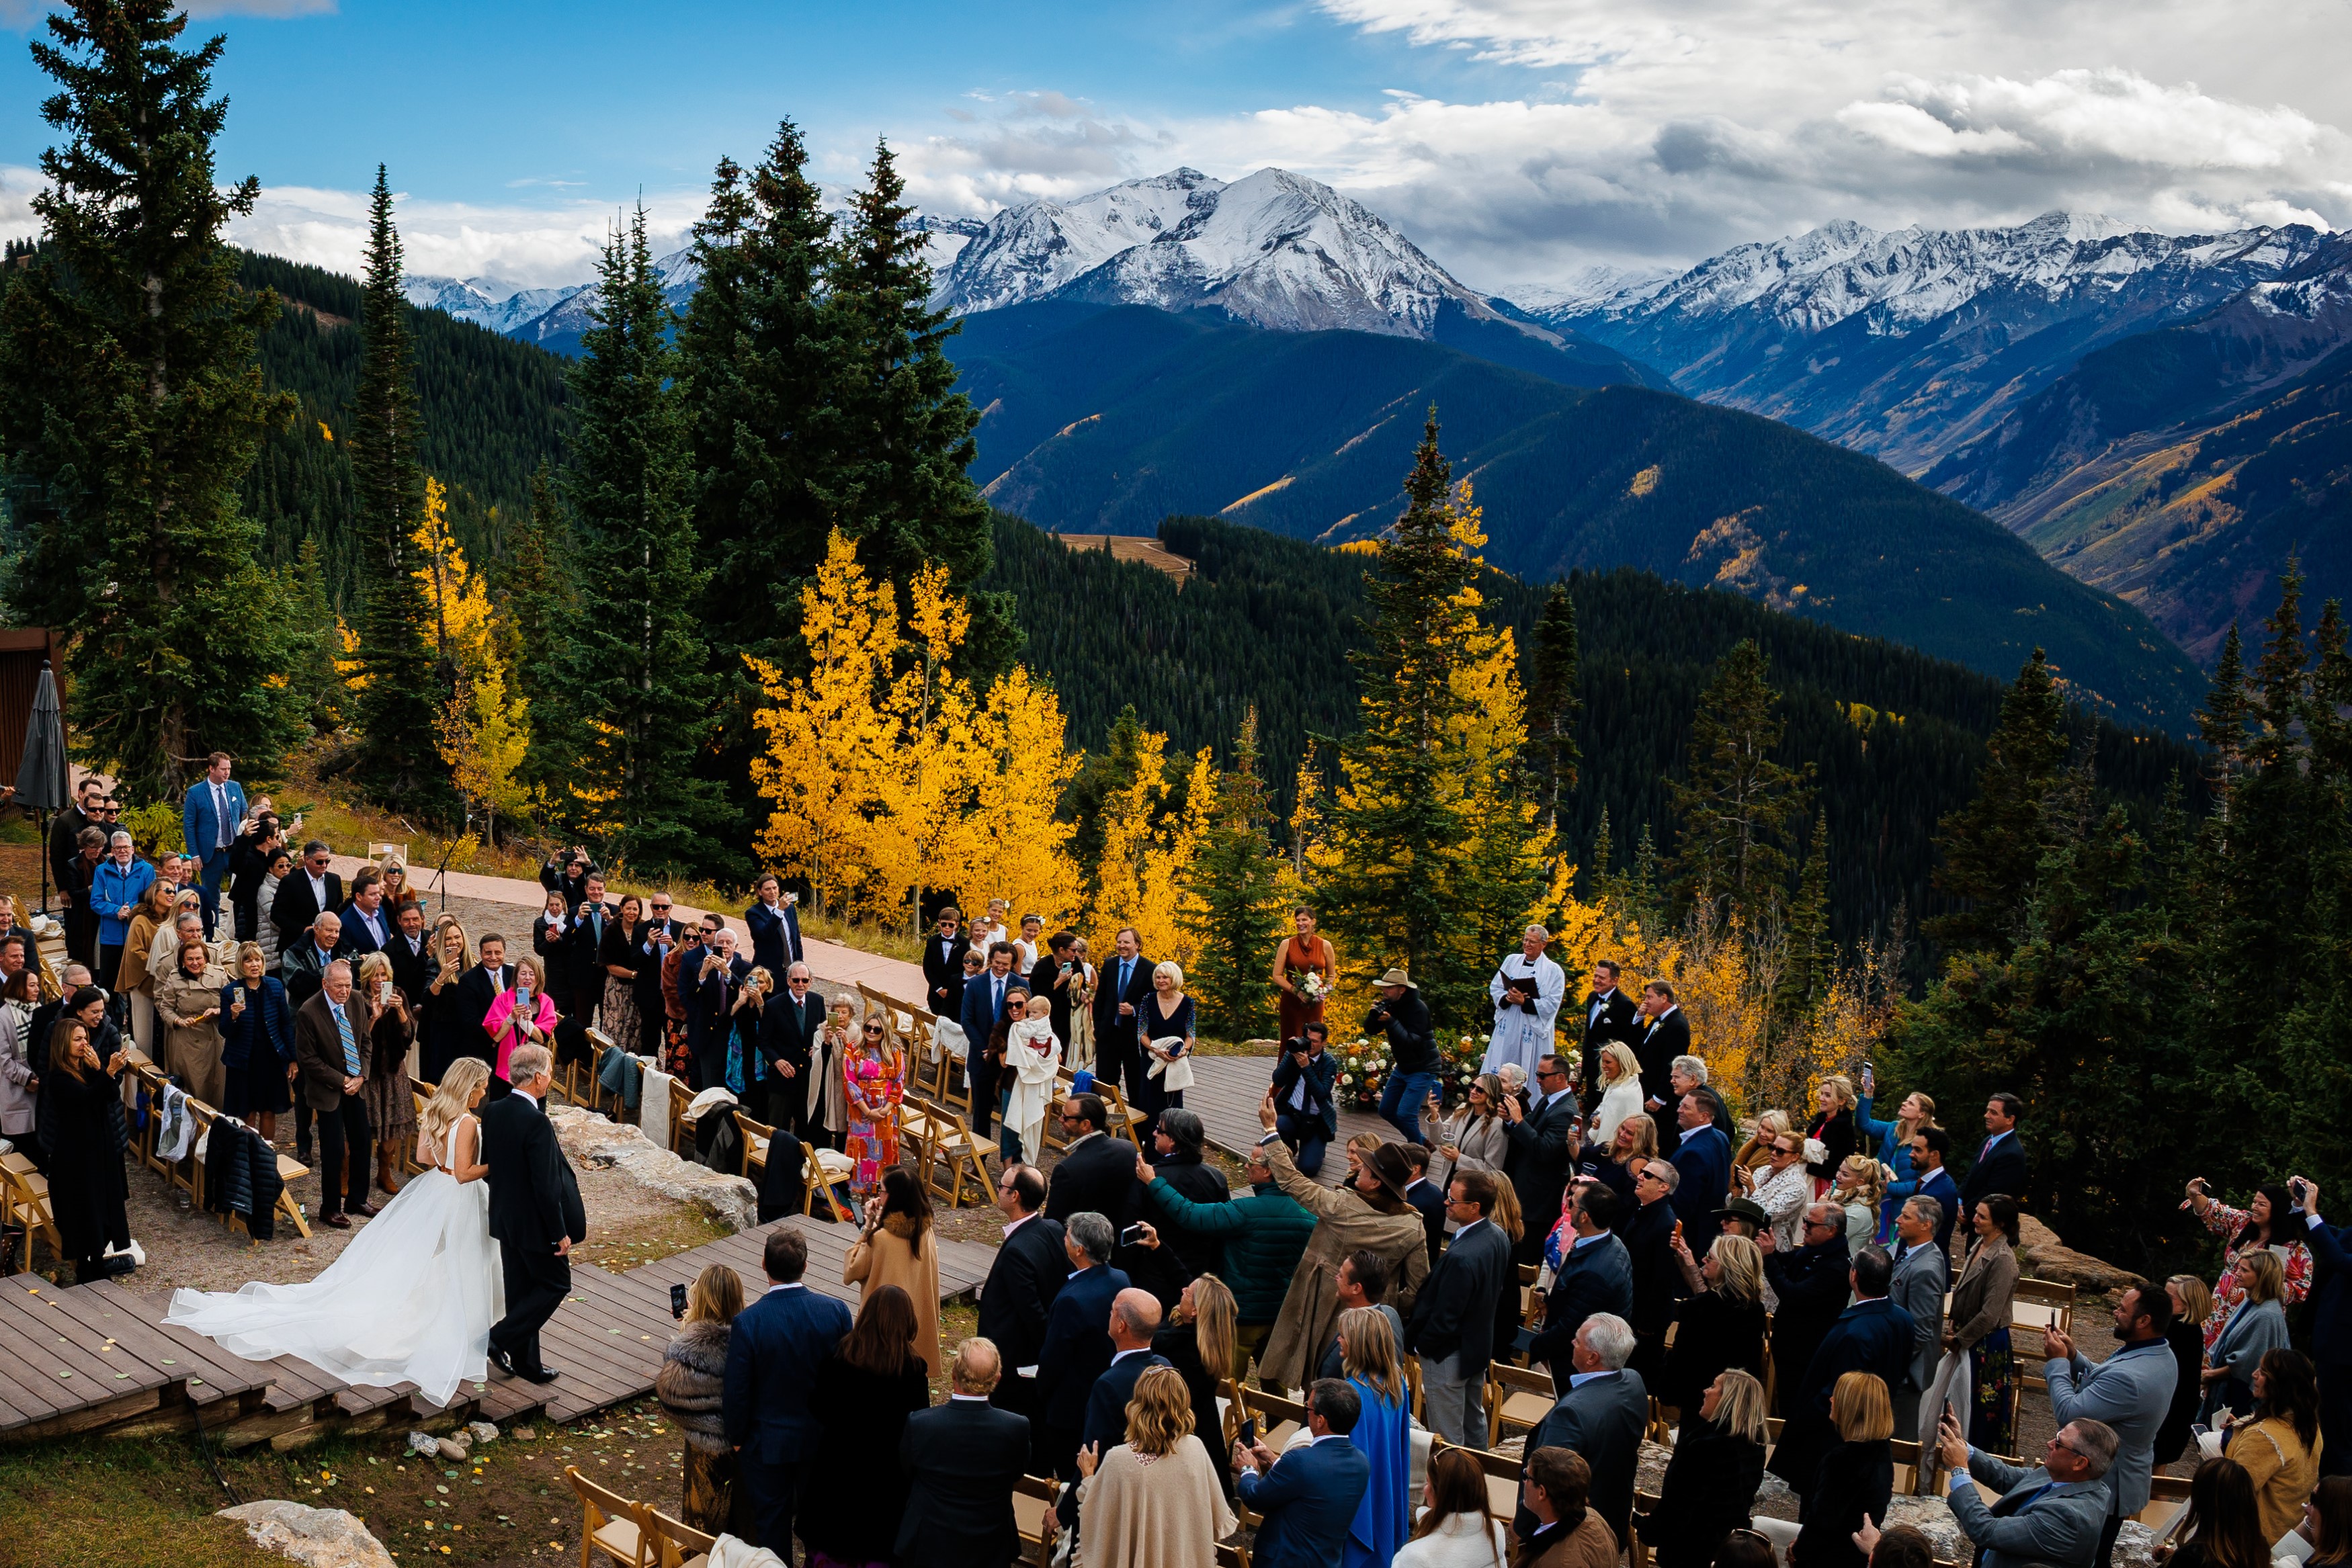 A bride walking down the isle at the Little Nell's Aspen Wedding Deck for a fall wedding ceremony.